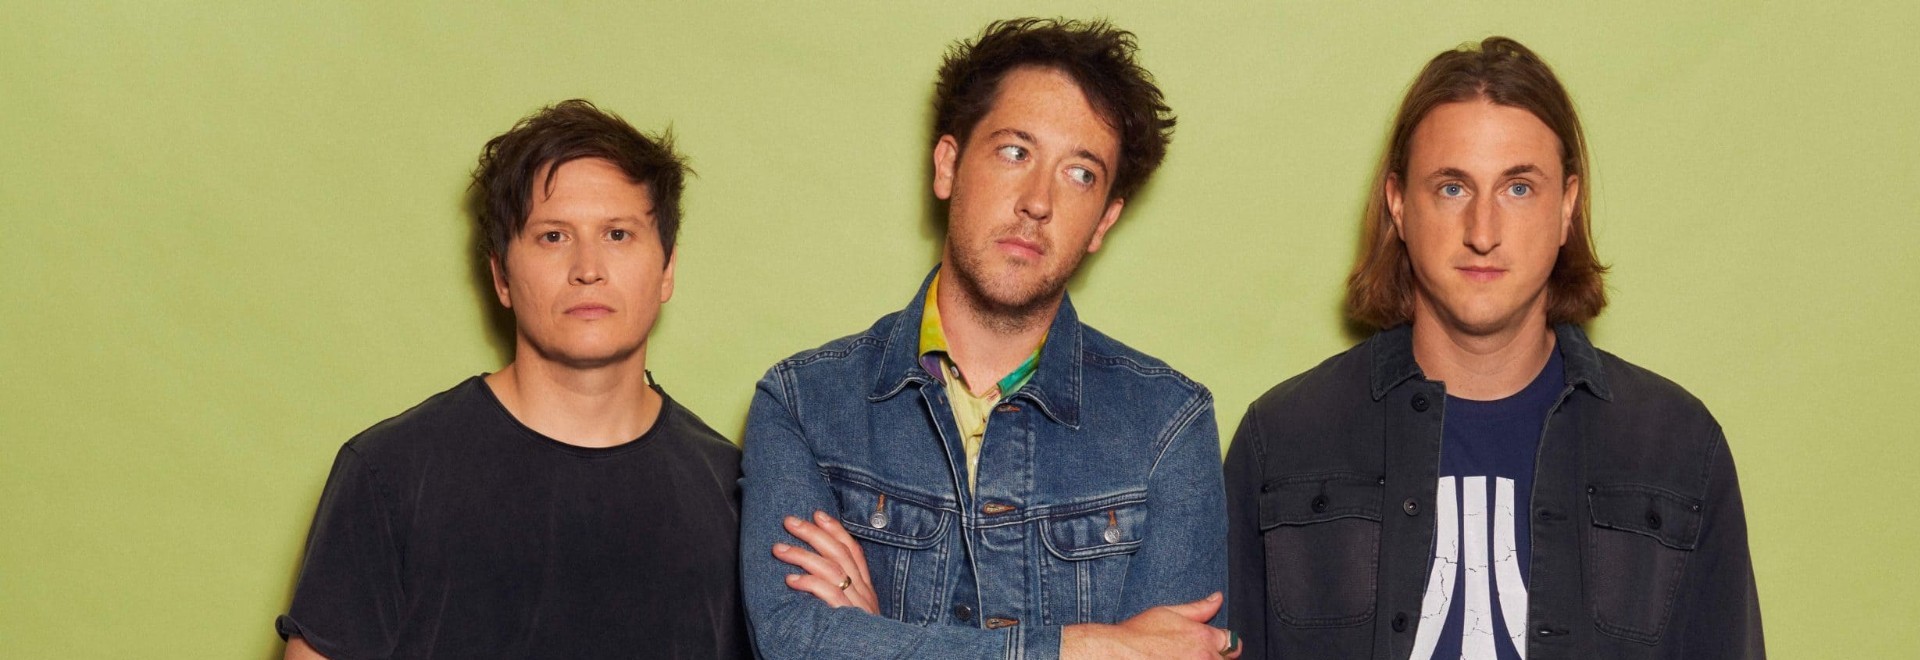 the wombats interview 2022